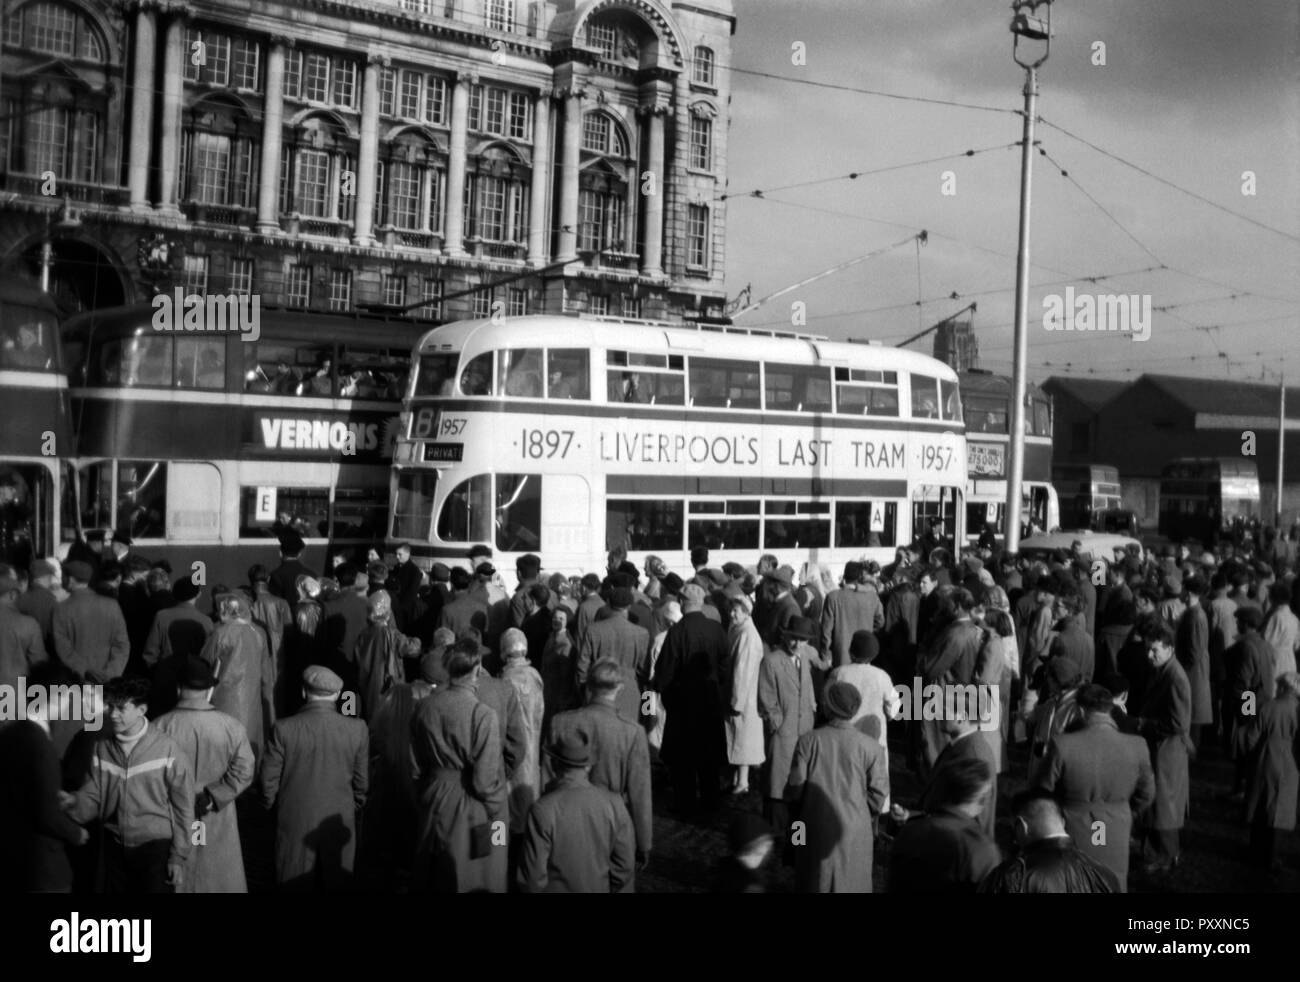 Farewell to Liverpools trams. Liverpool's last tram no 293 on its final procession through the city centre. Image taken on 14 September 1957 Shortly afterwards it was shipped off to the Seashore Trolley museum in Kennebunkport, Maine, USA. As of 2017 it has remained there at the back of a shed and in a poor condition. Stock Photo